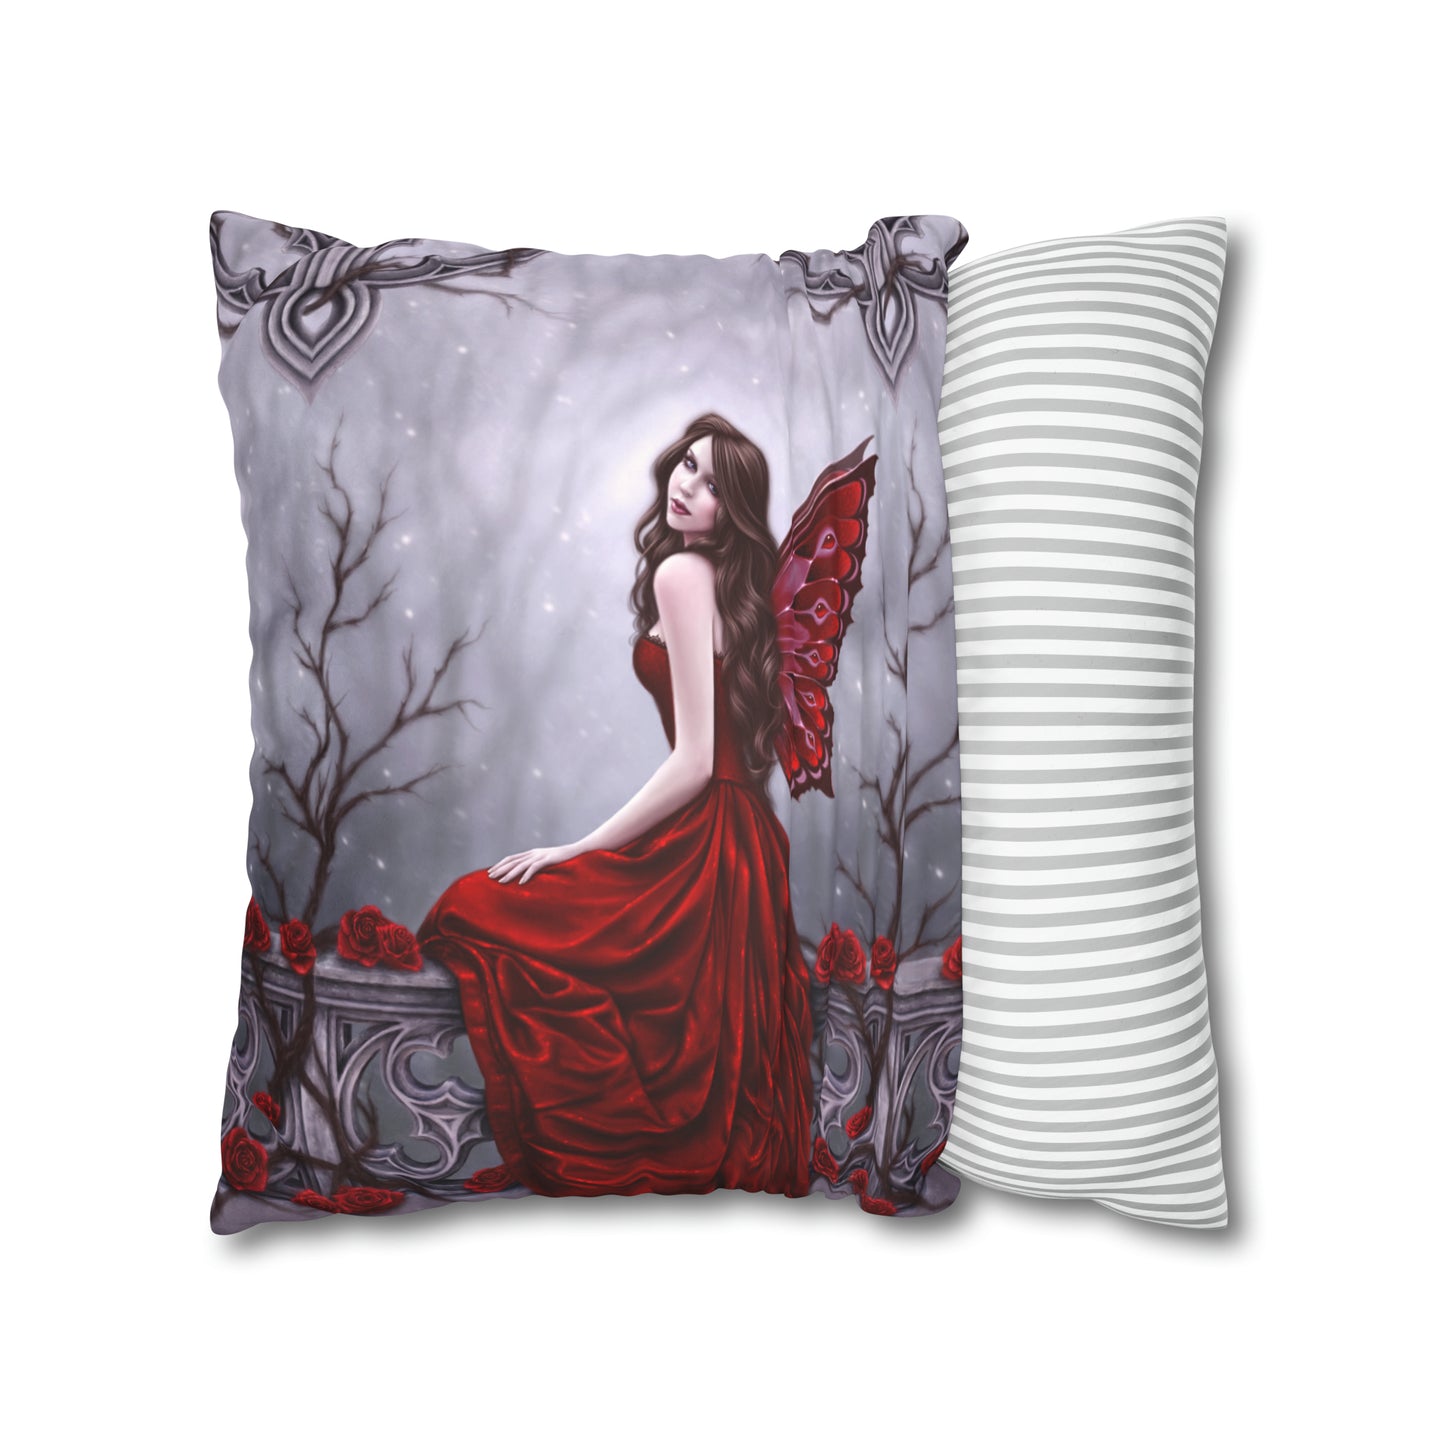 Throw Pillow Cover - Winter Rose